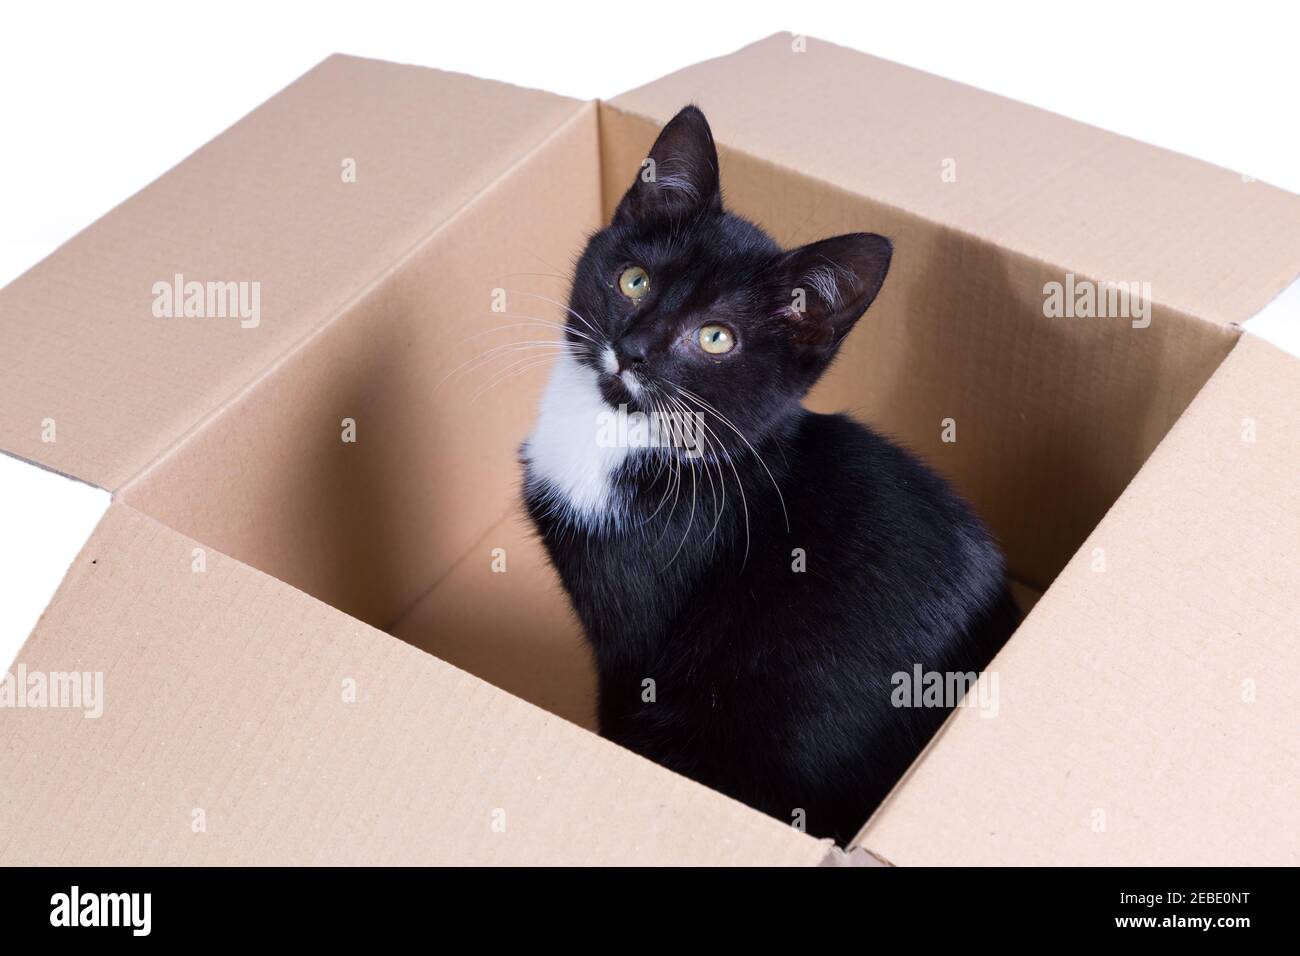 A cute three month old black tuxedo kitten in a cardboard box looking up in an innocent way. Stock Photo